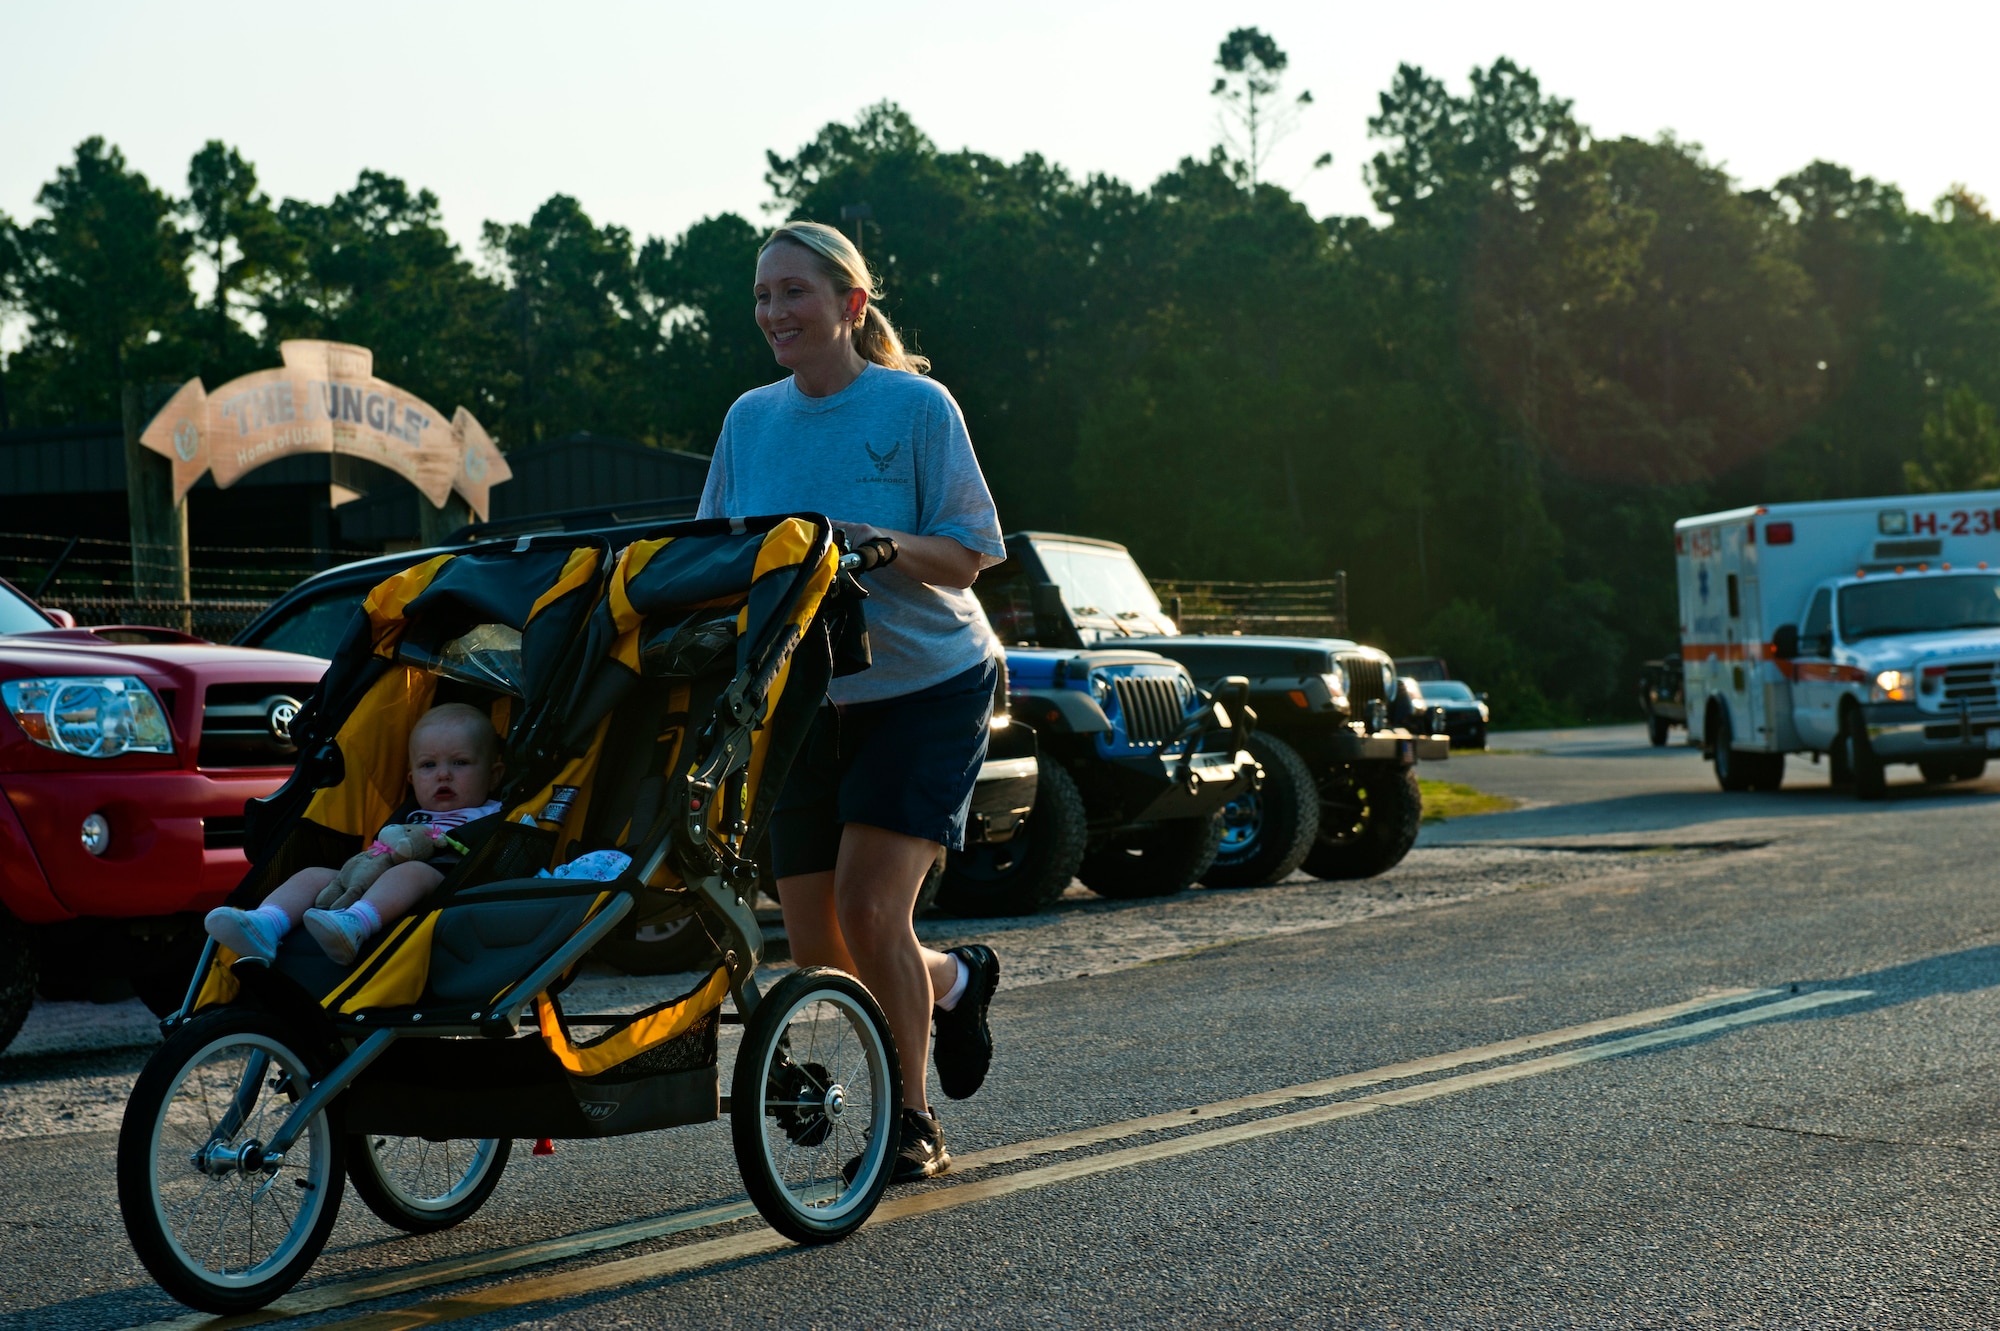 Capt. Kristen Duncan, Air Force Special Operations Command Public Affairs, jogs with her daughter, Luci, June 29, 2012, at Hurlburt Field, Fla. AFSOC hosted Bring Your Child to Work Day. (U.S. Air Force photo by Staff Sgt. David Salanitri)